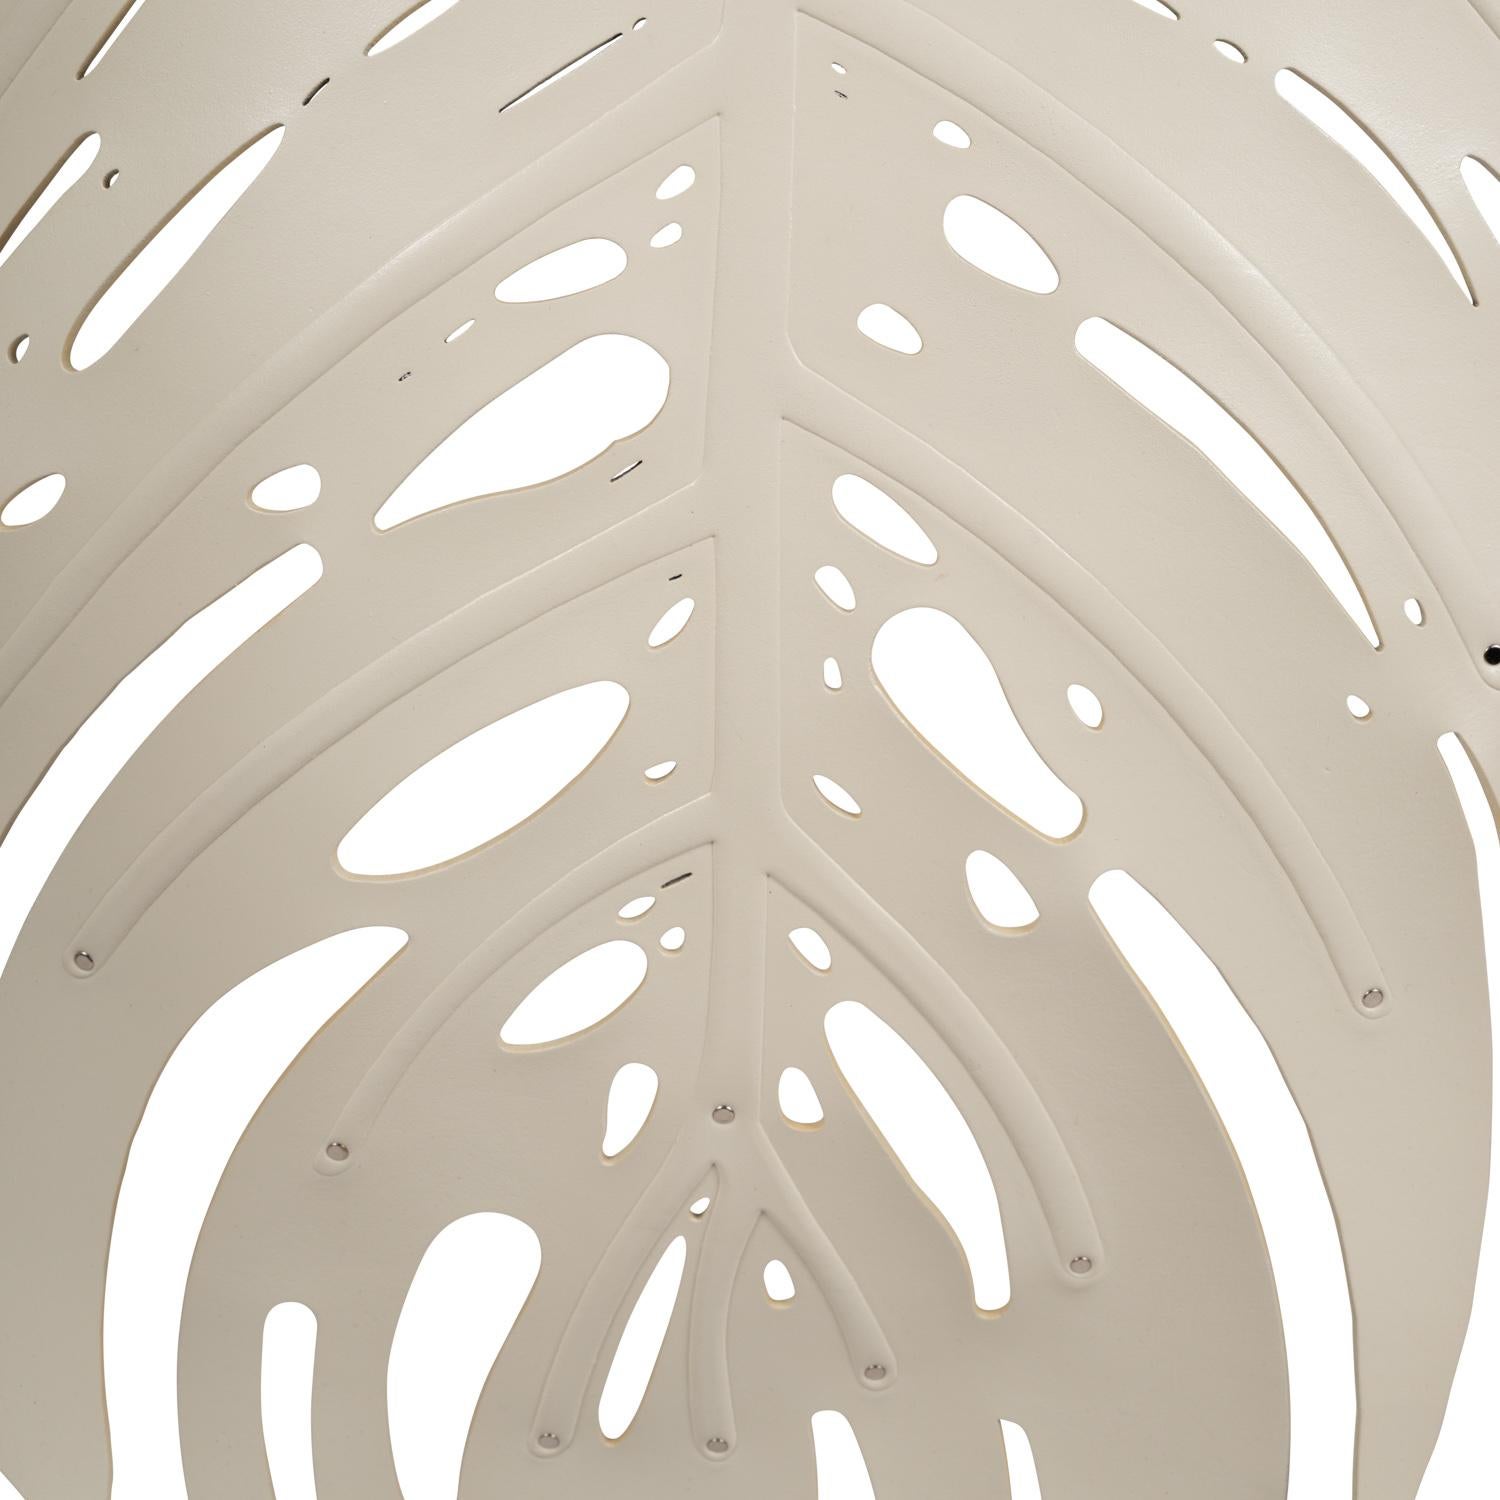 The “Delicious Monster” wall sconce is inspired by nature and the Philodendron Monstera plants found throughout the coastal regions of southern Africa. Conceived and handmade in the Durban, South Africa studio of Xavier Clarisse, each piece is